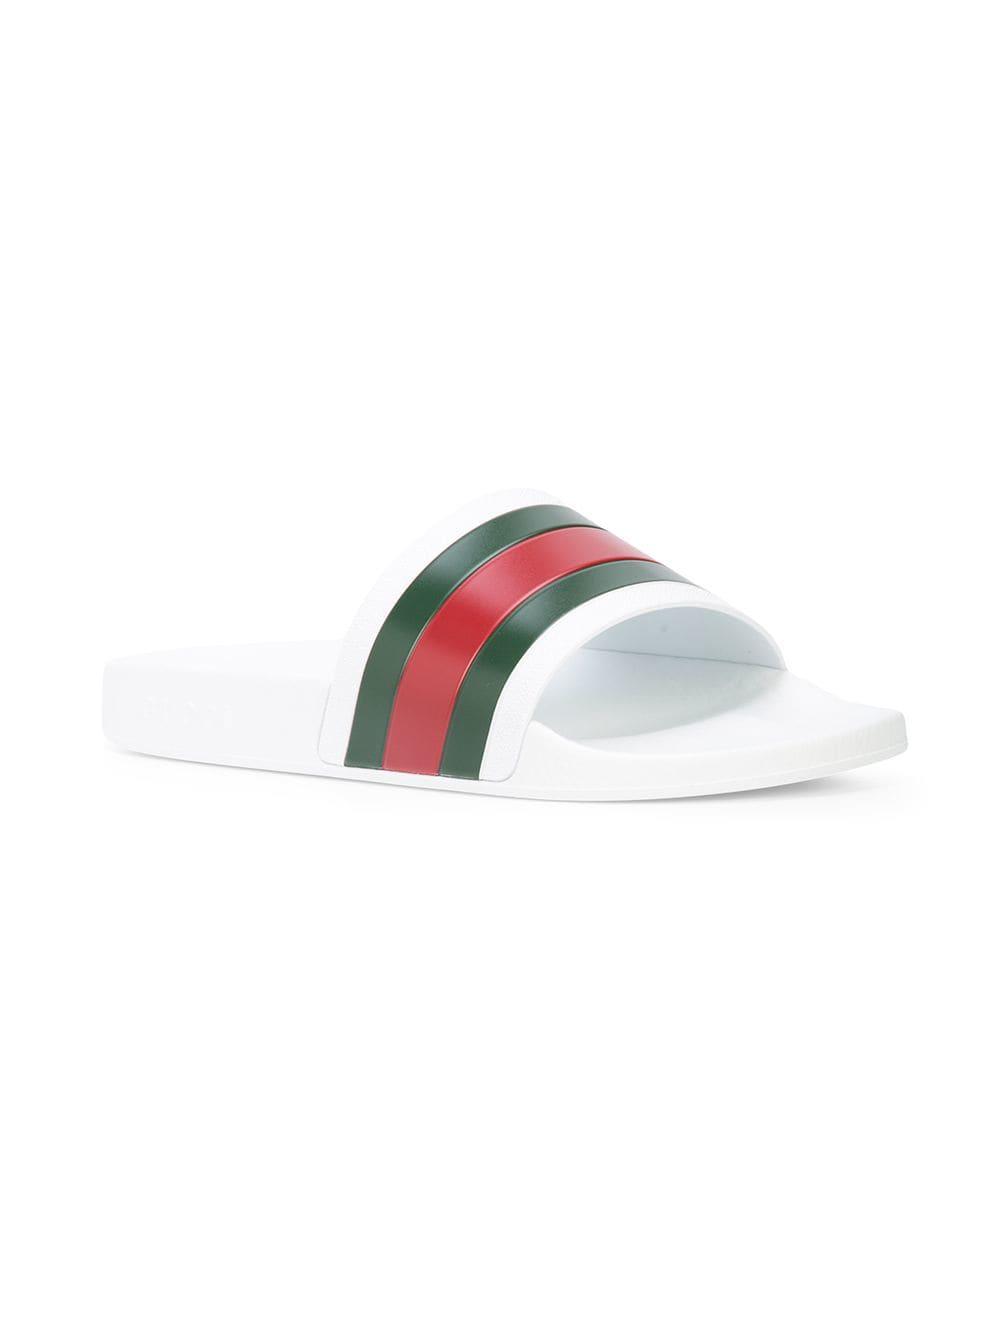 all white gucci slides, OFF 73%,www 